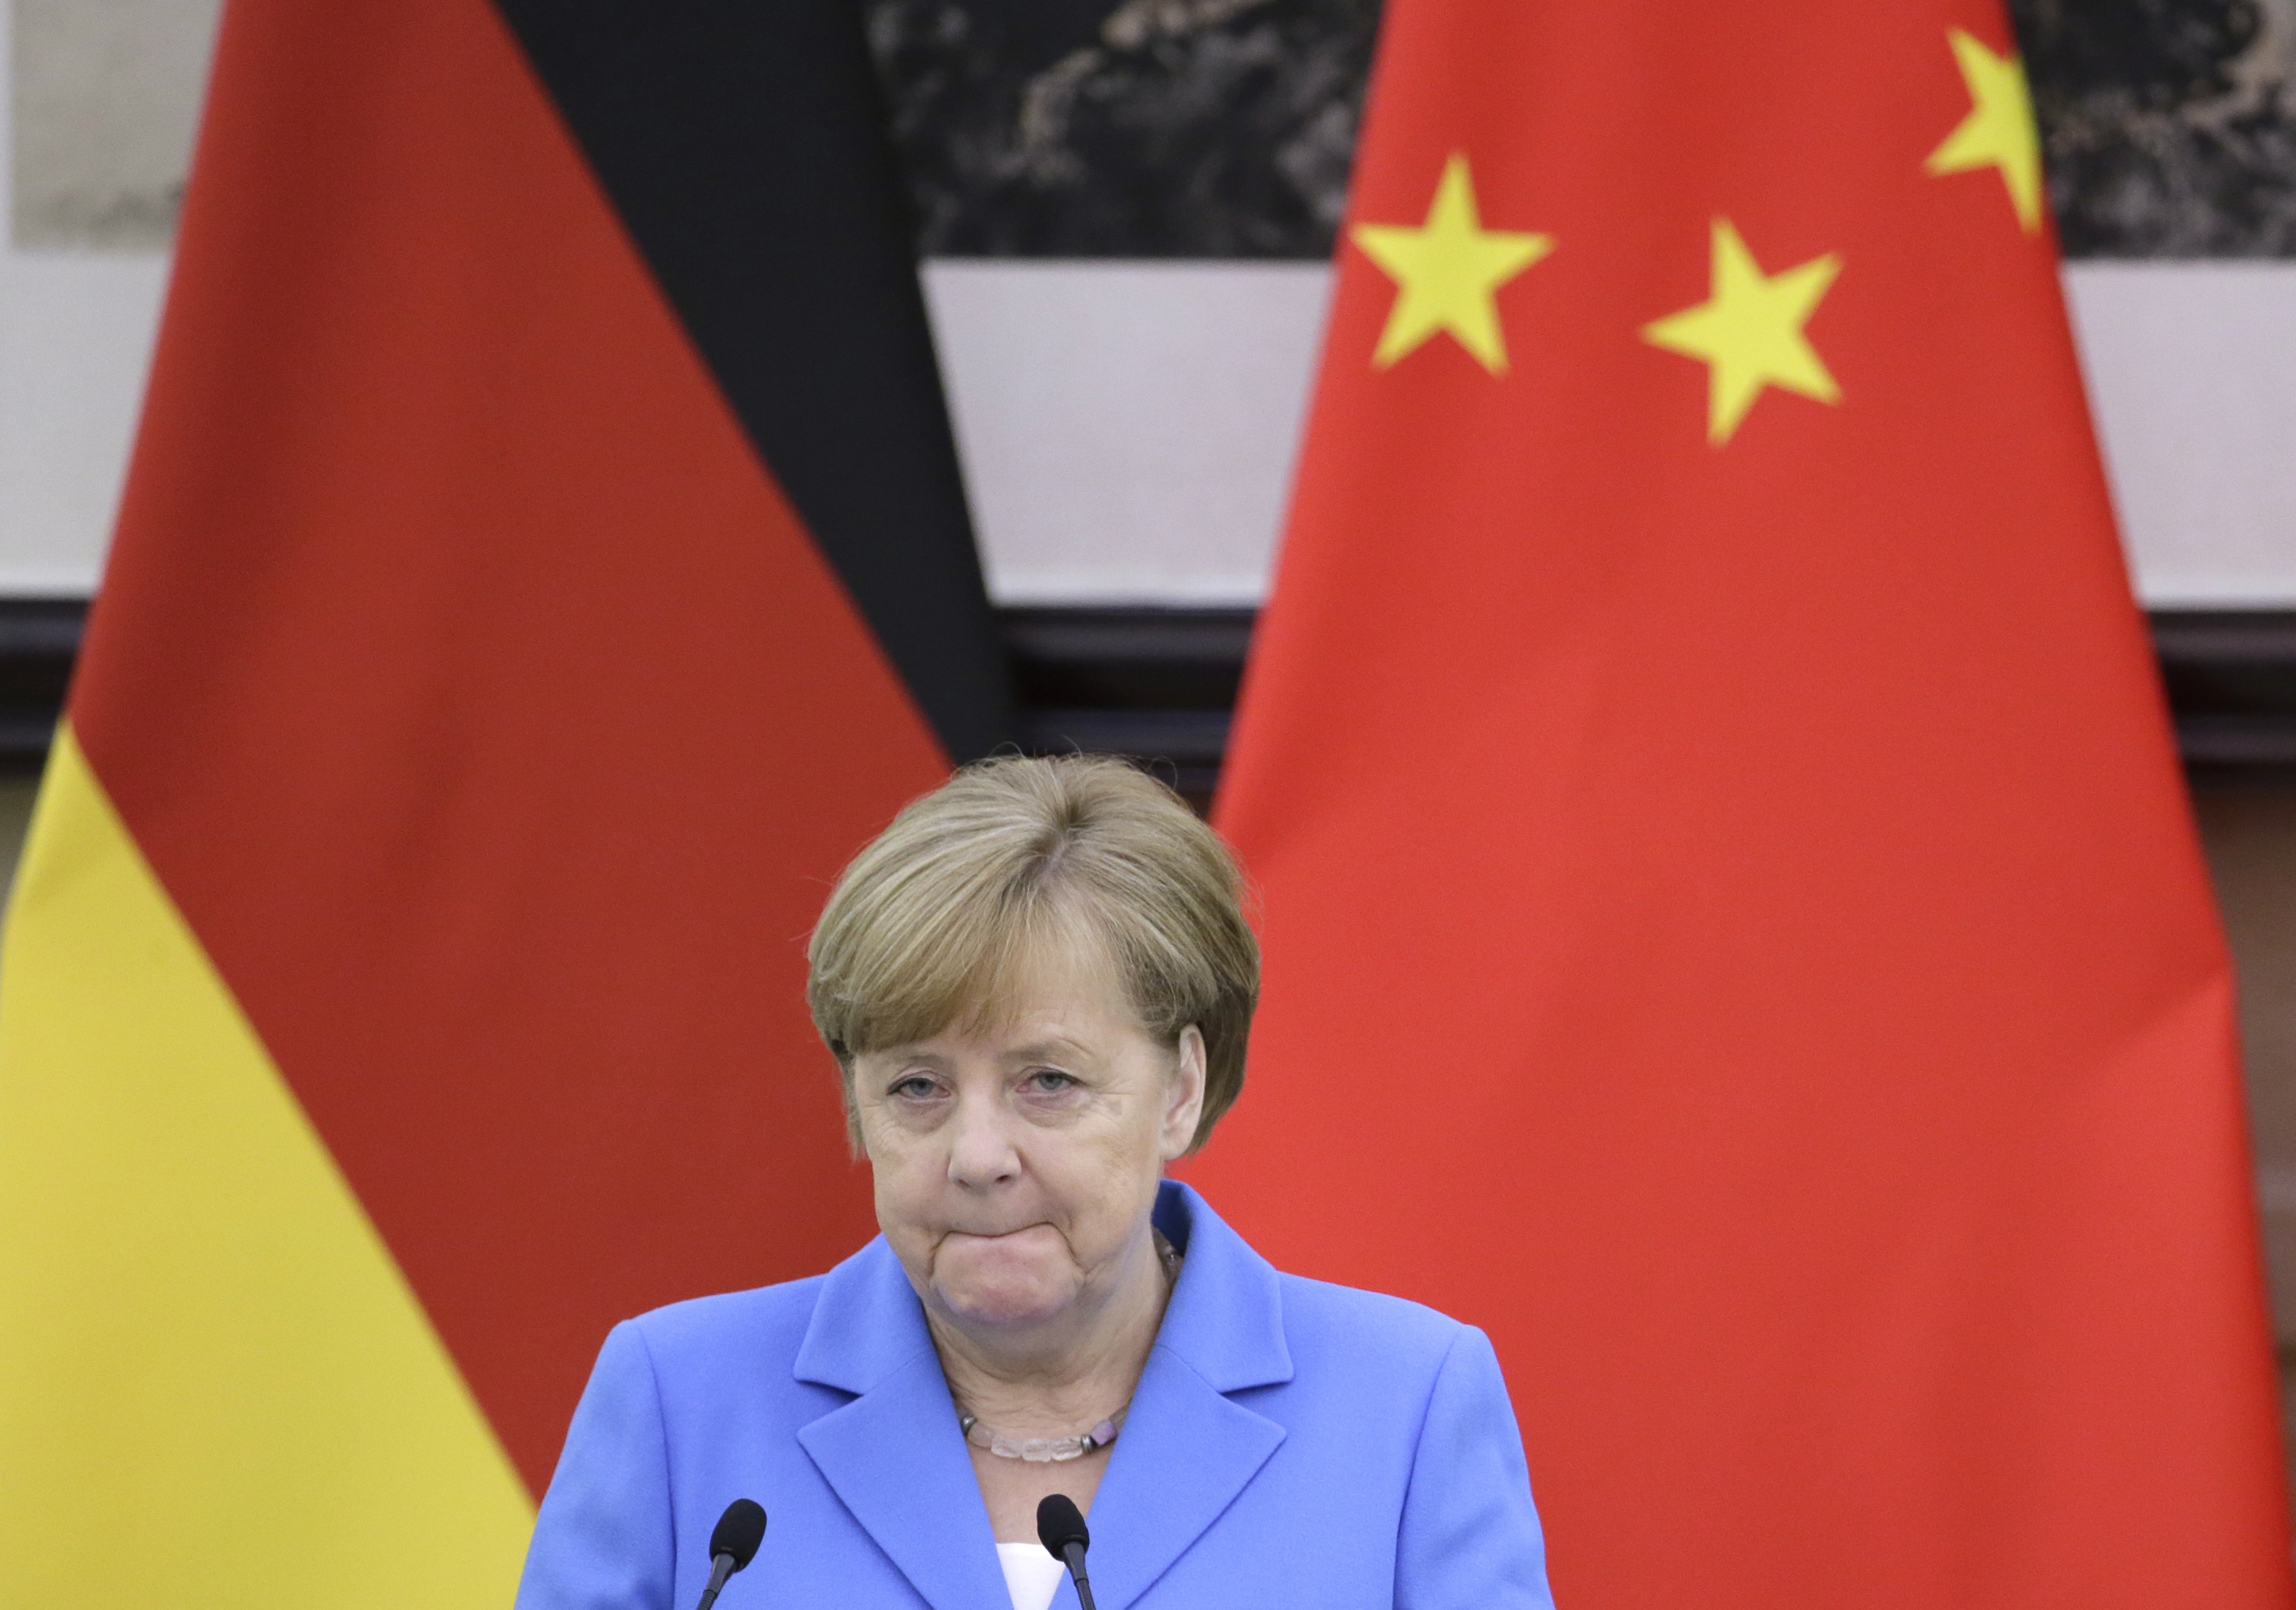 Eric Brattberg and Philippe Le Corre write that the German chancellor’s appeasing tone on China’s economic policies opens a negotiating window ahead of July summit